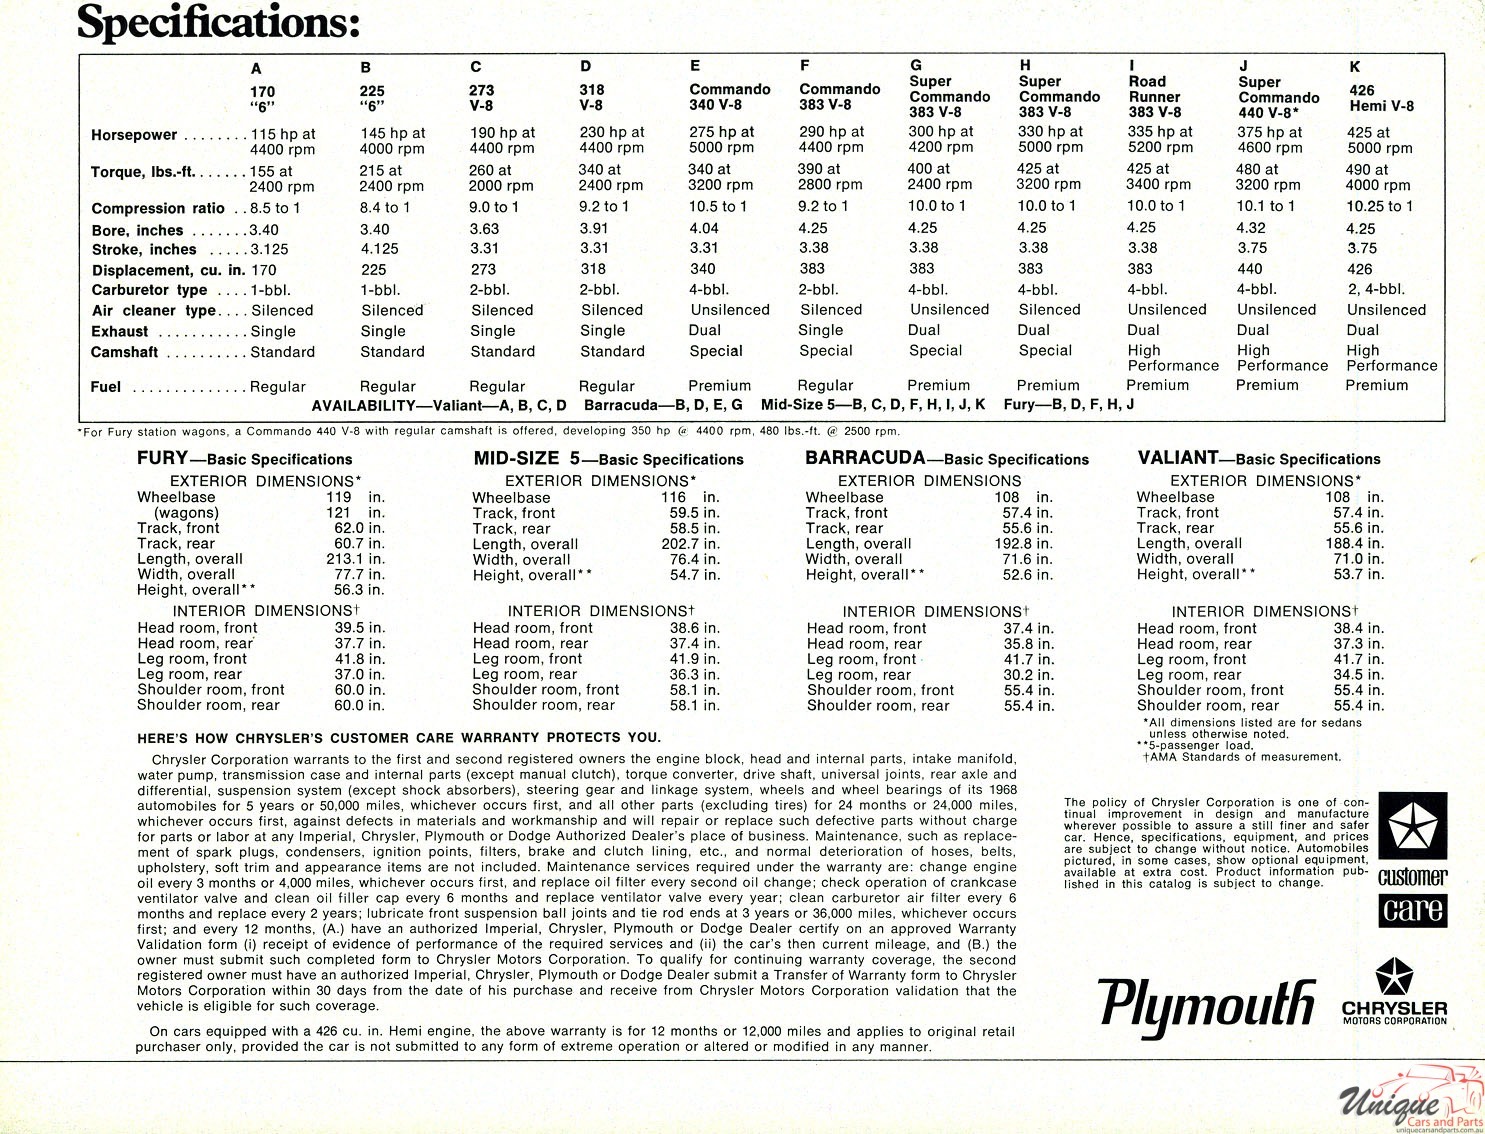 1968 Plymouth All Models Brochure Page 24